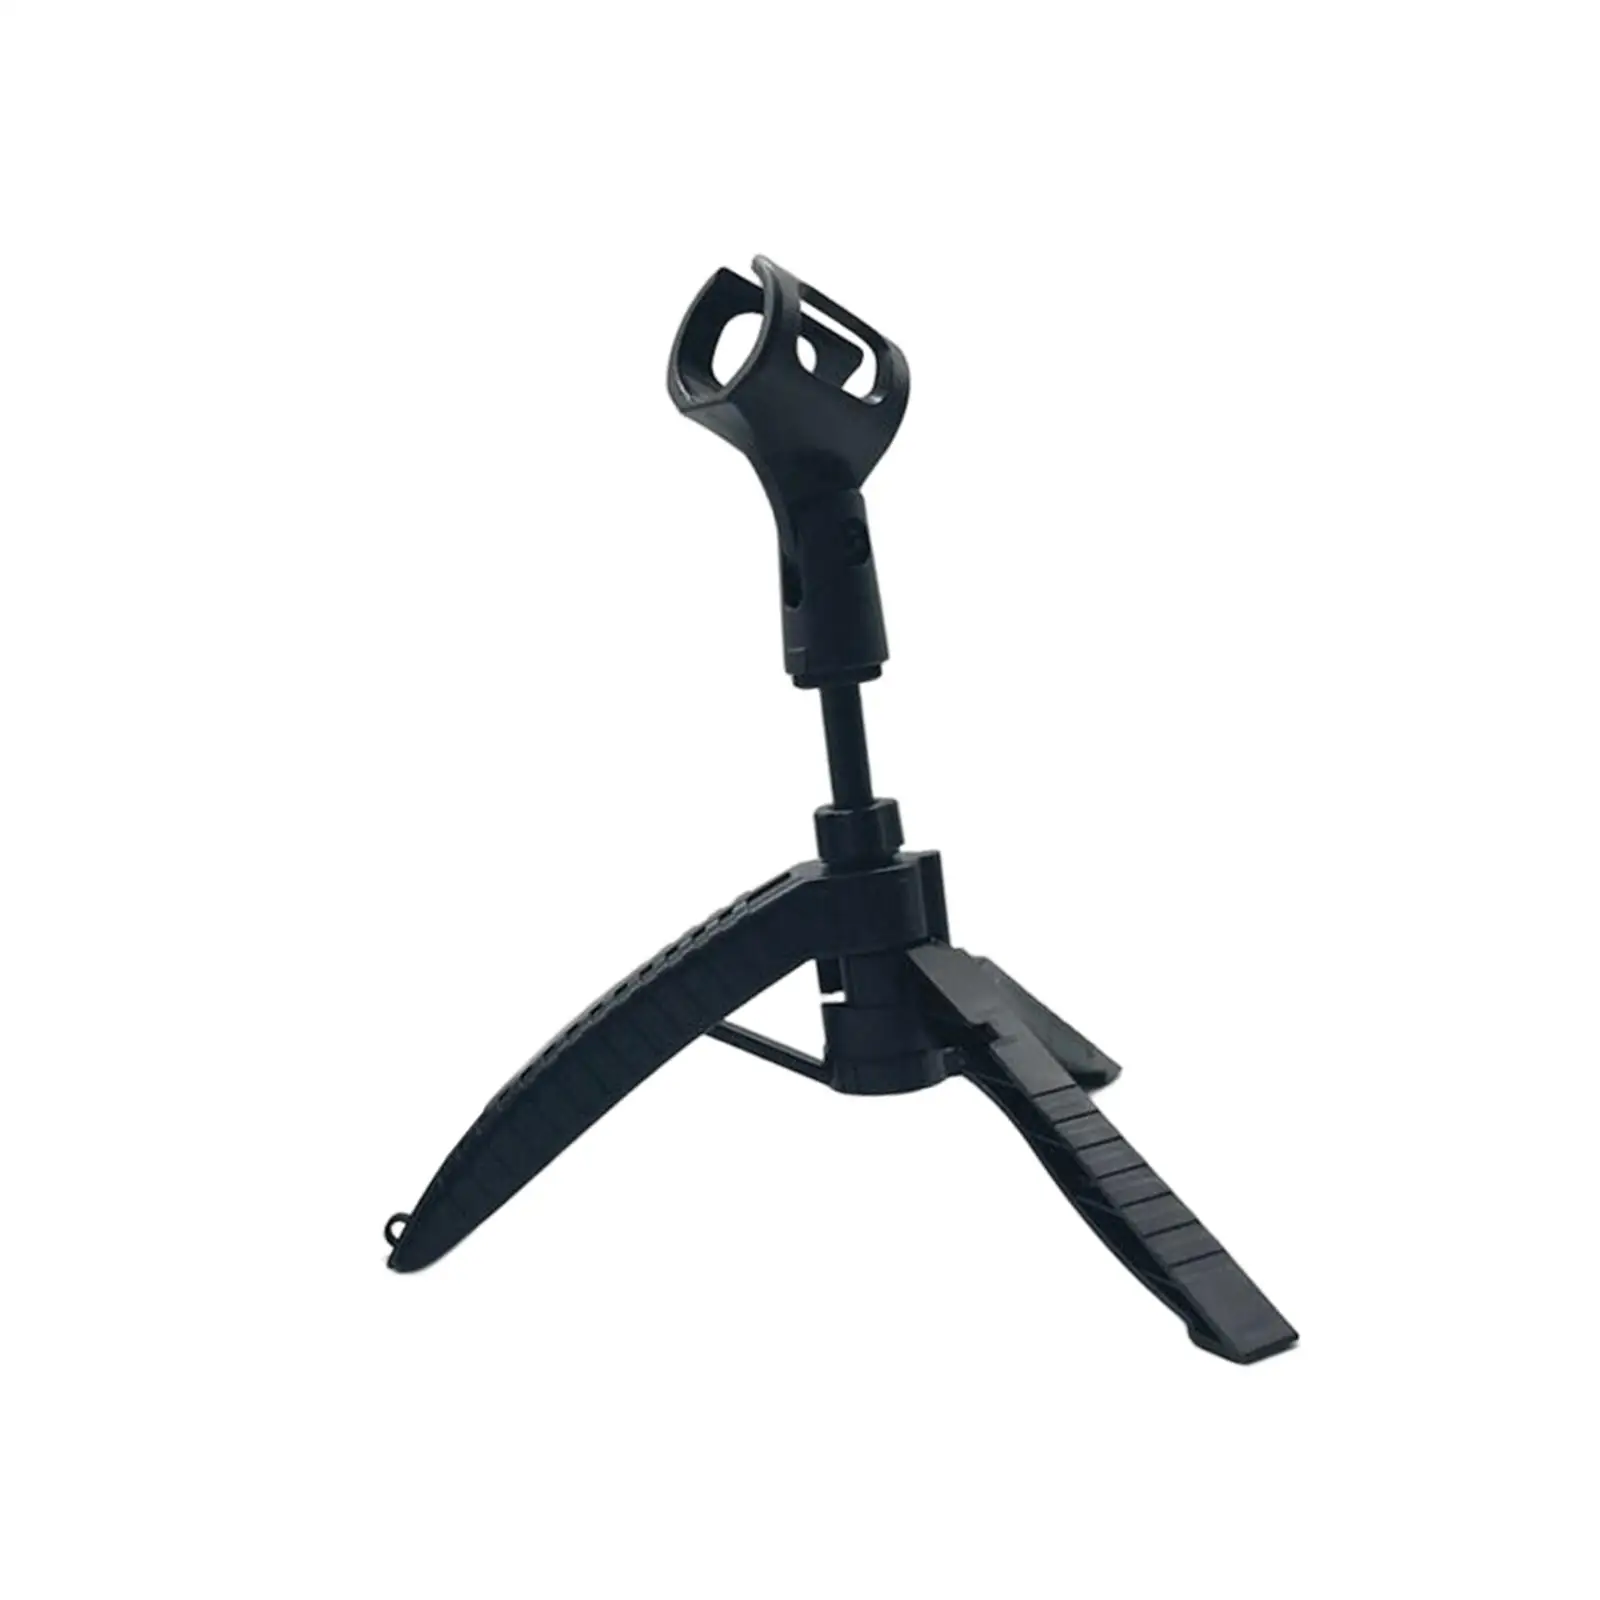 Collapsible Microphone Tripod Universal Stable Desktop Mic Stand Holder for Computer Recording Studio Broadcasting Lectures